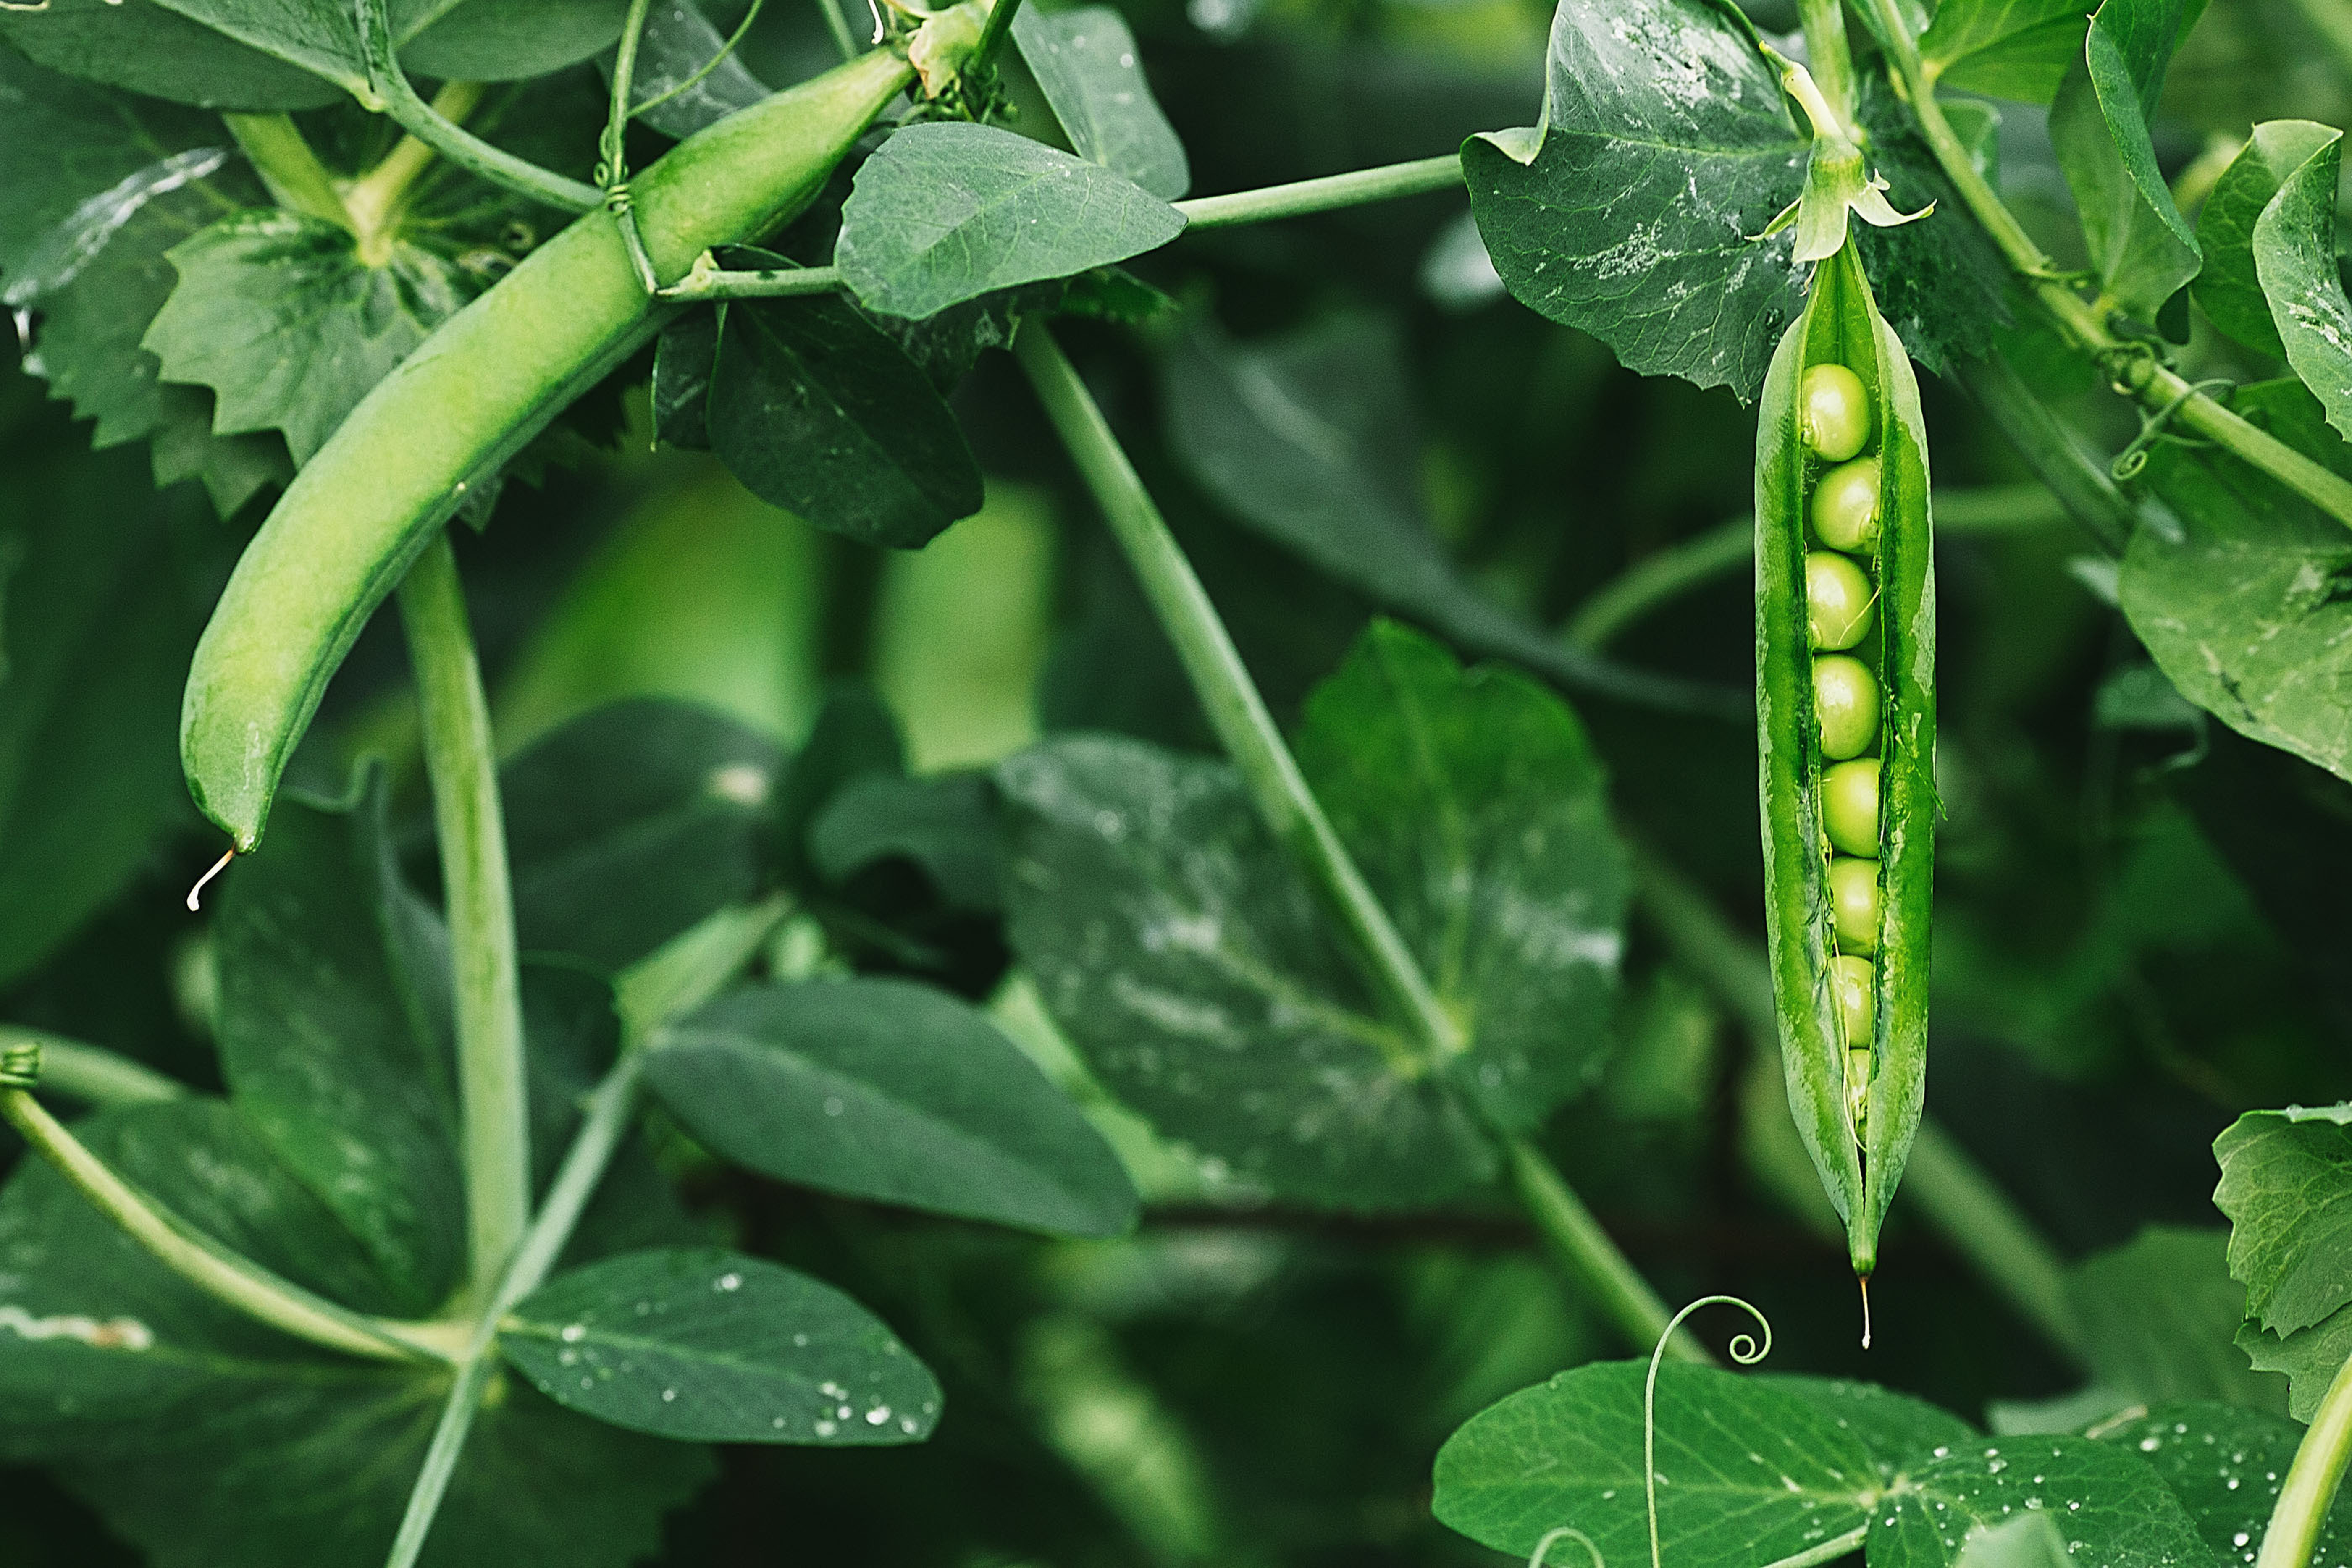 Not so pea-brained after all! Pea plants demonstrate ability to 'gamble' – a first in plants